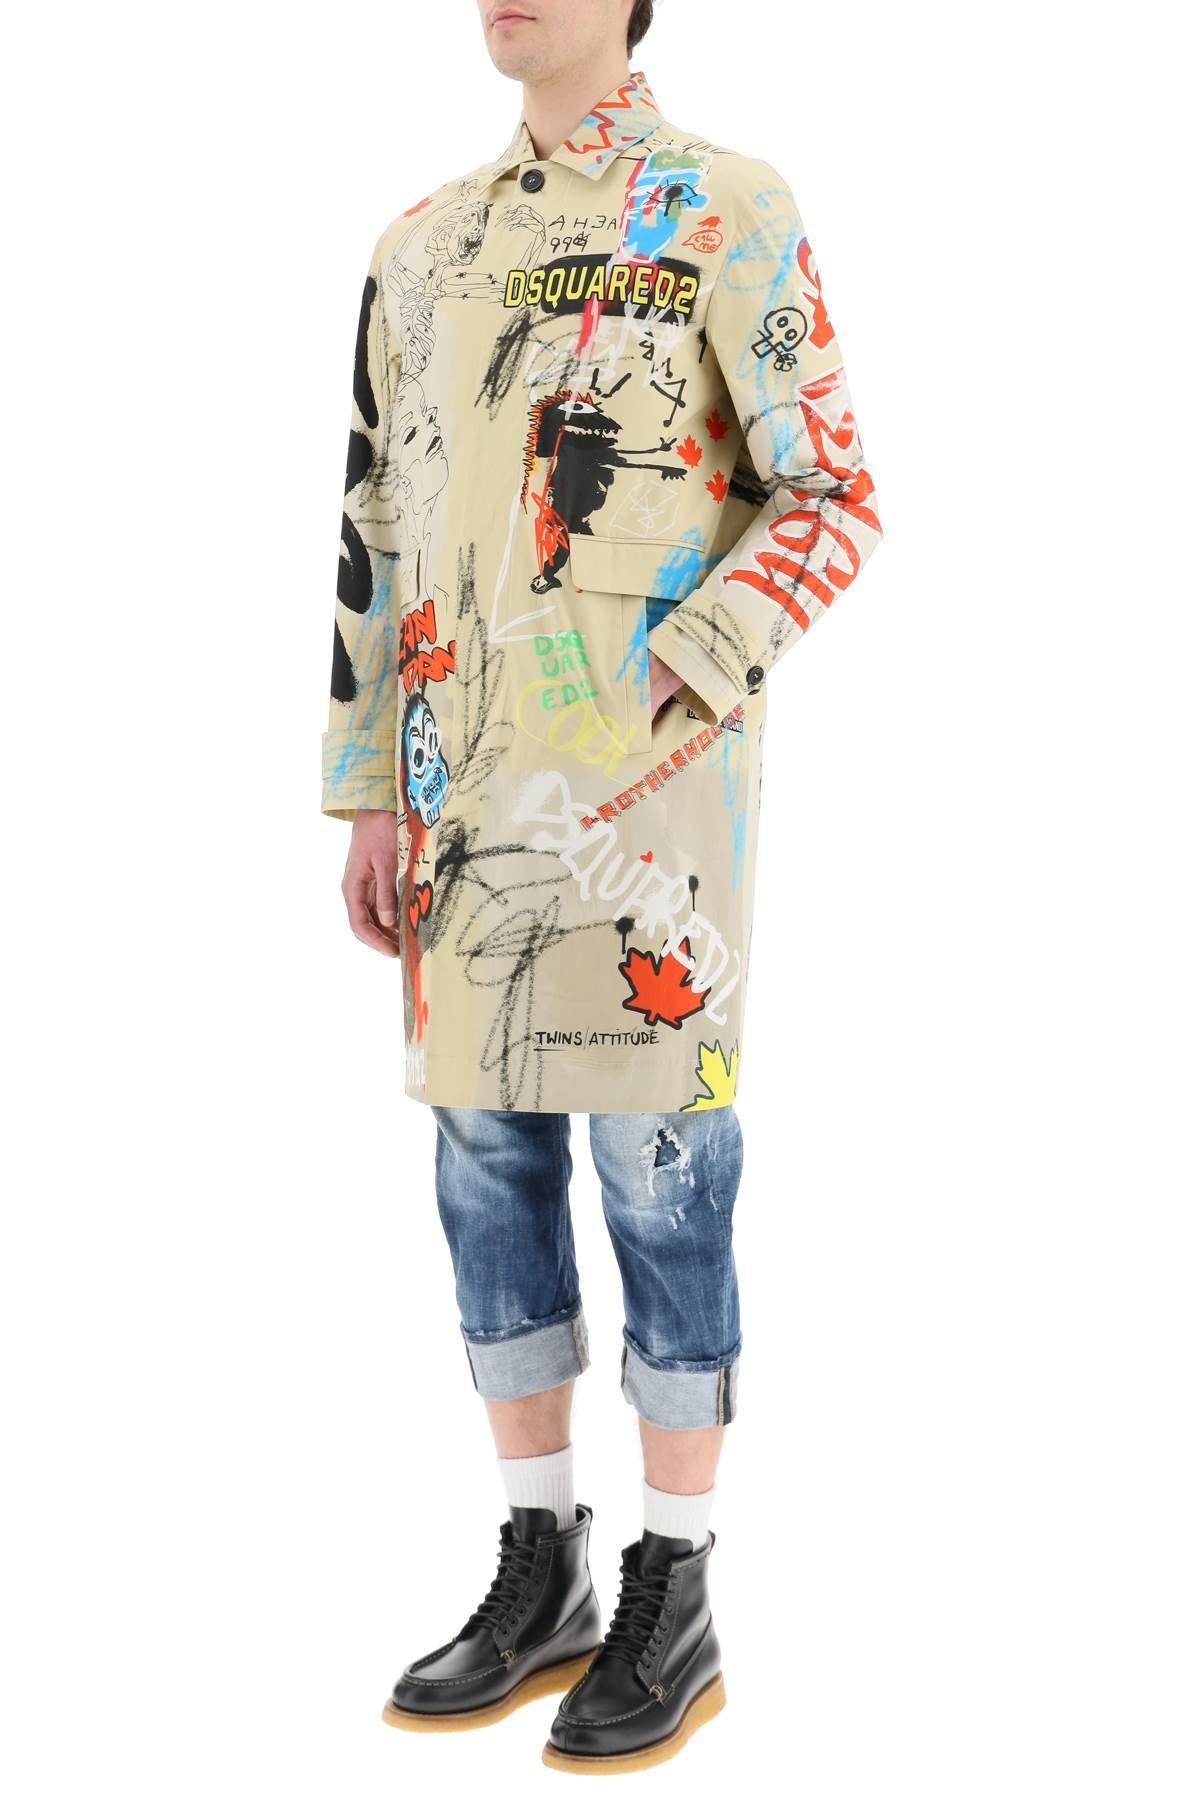 DSquared² Cotton Street Art Light Trench for Men - Save 39% | Lyst